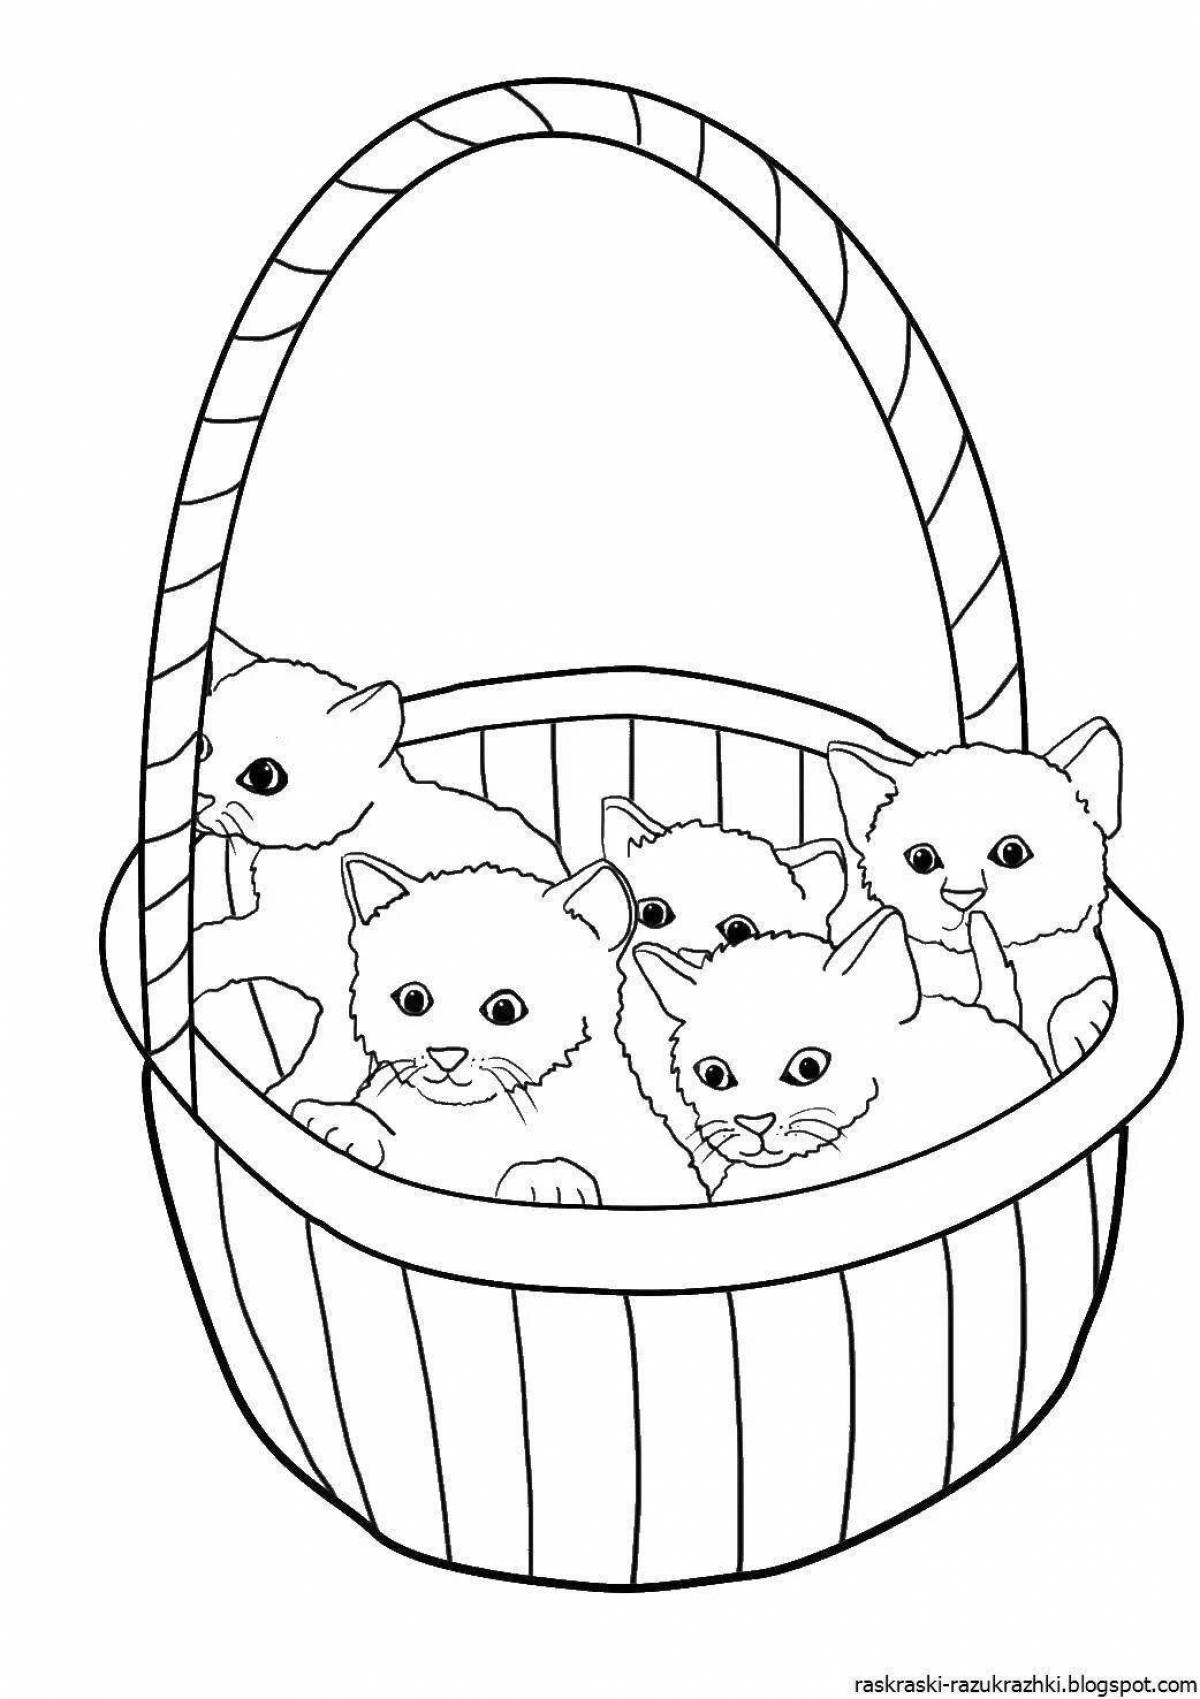 Coloring happy kittens